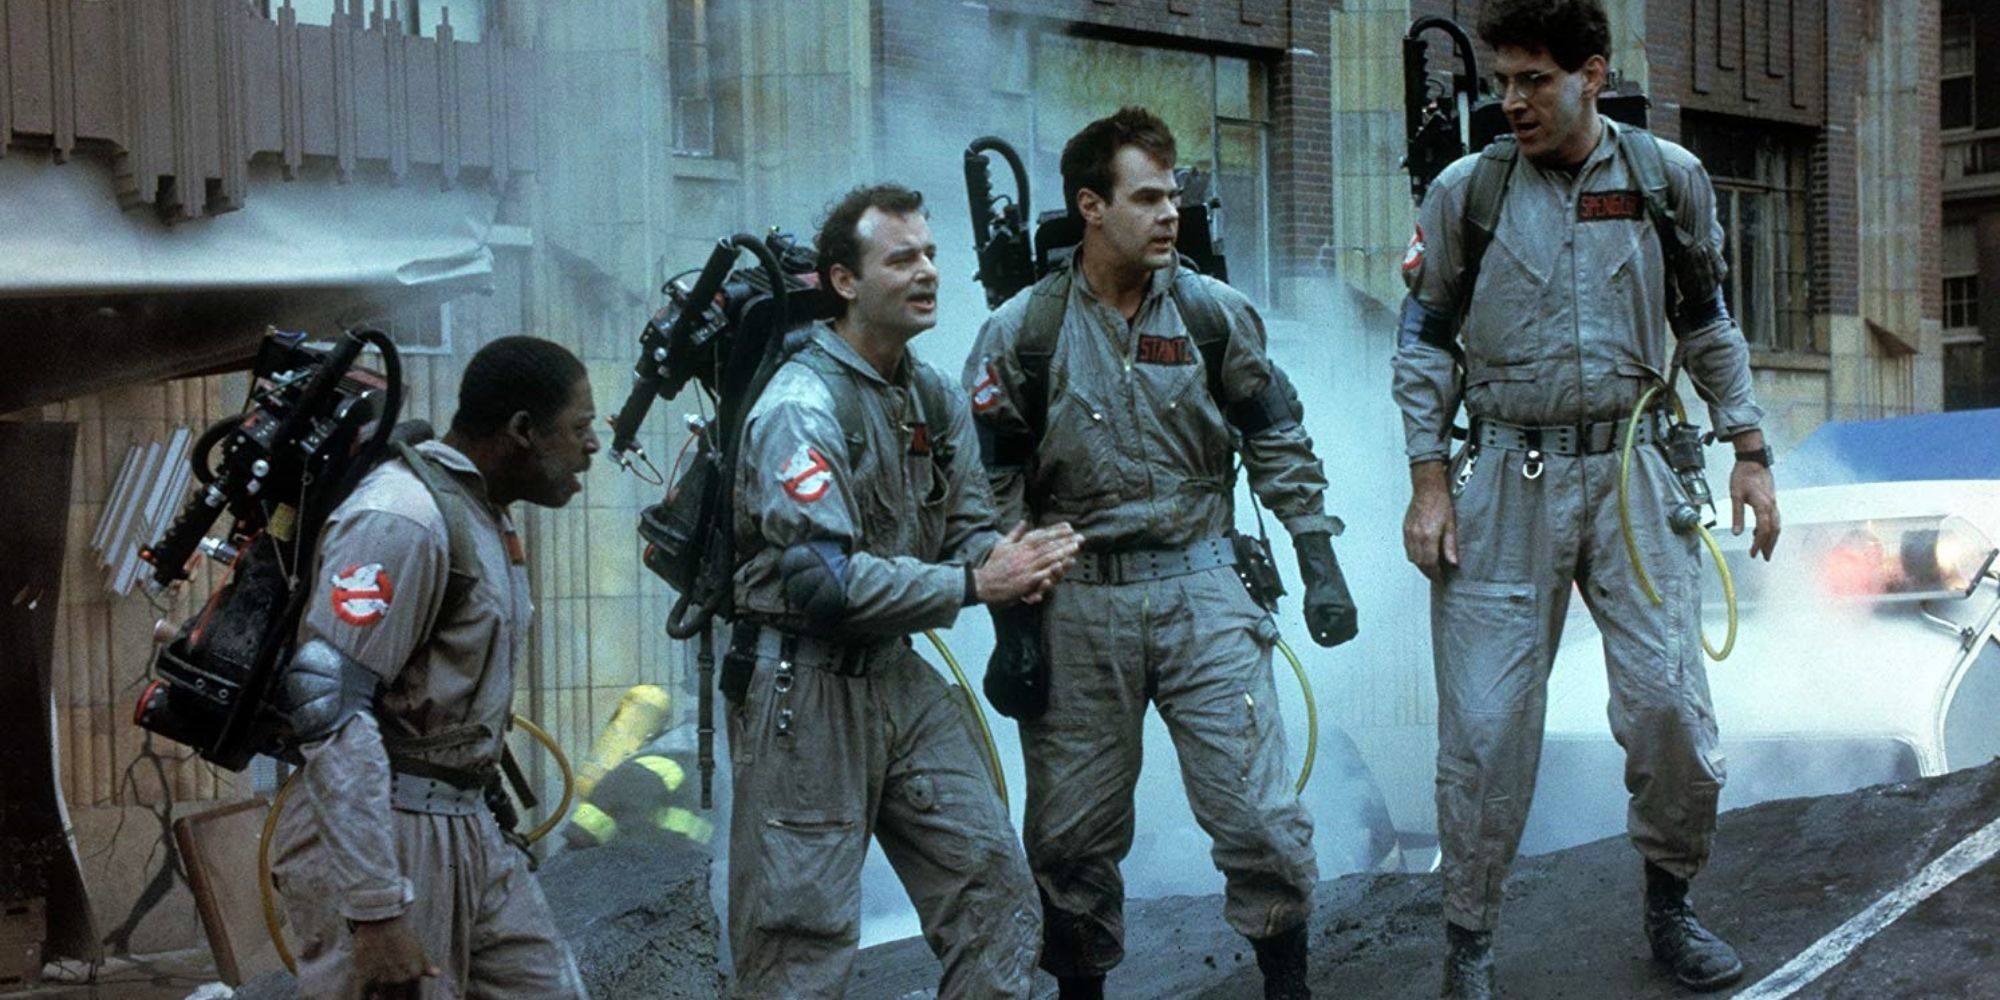 The four Ghostbusters in action